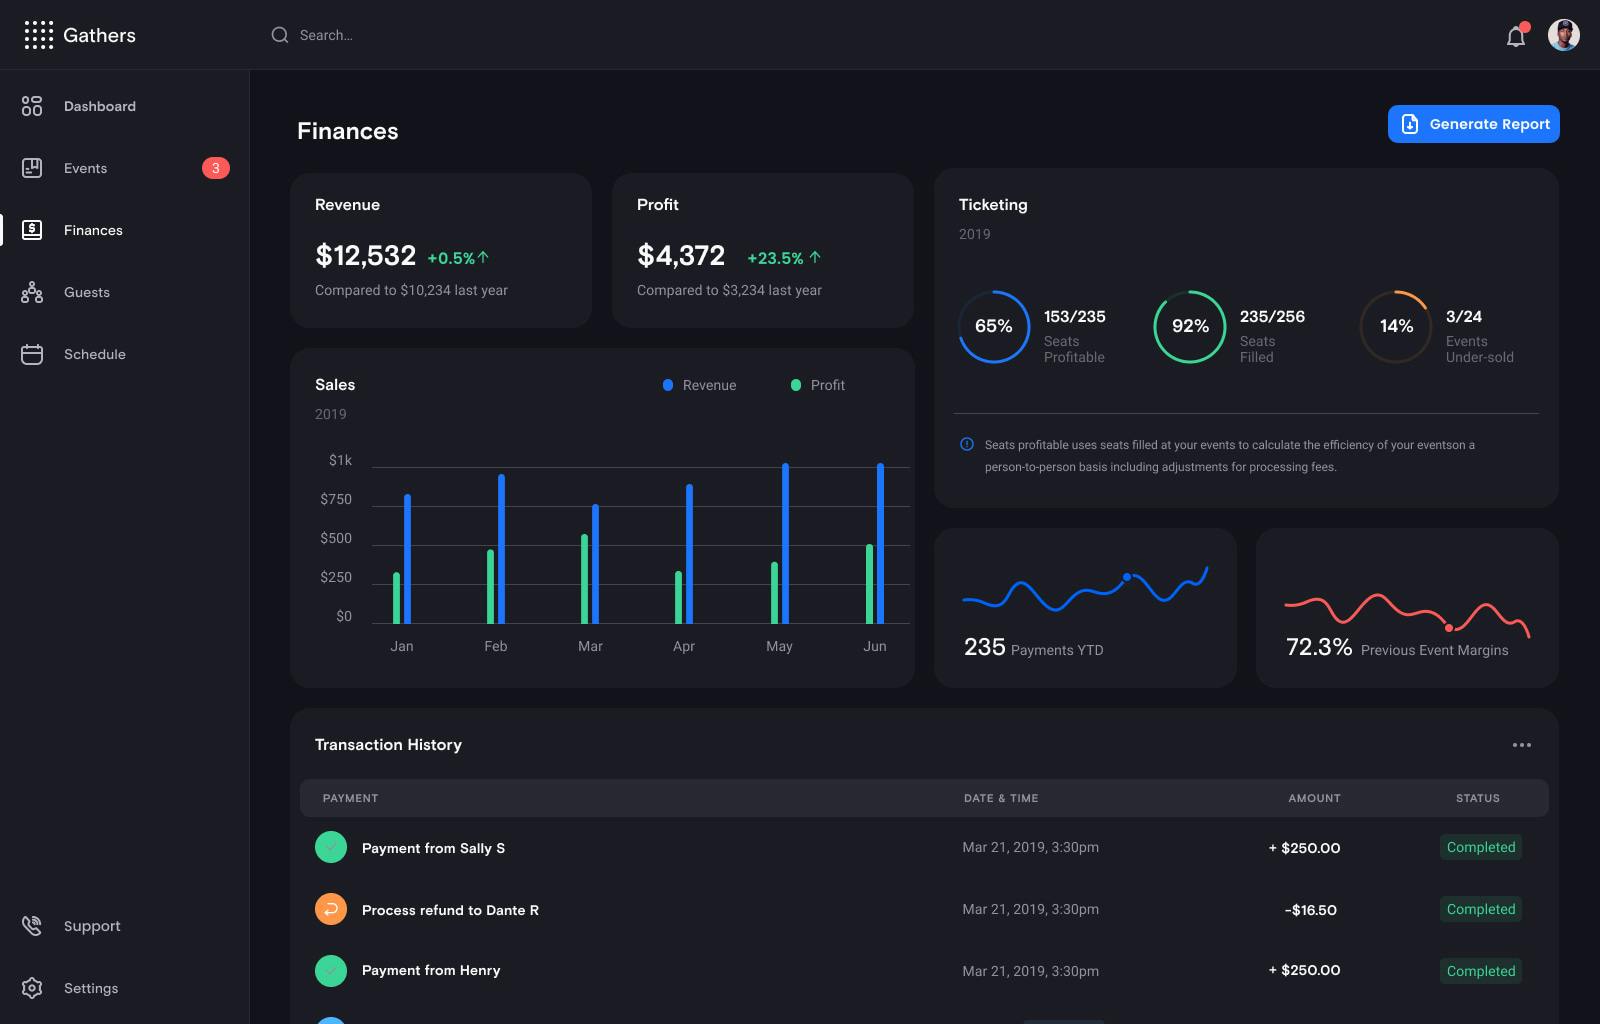 The Gathers software financial tracking page